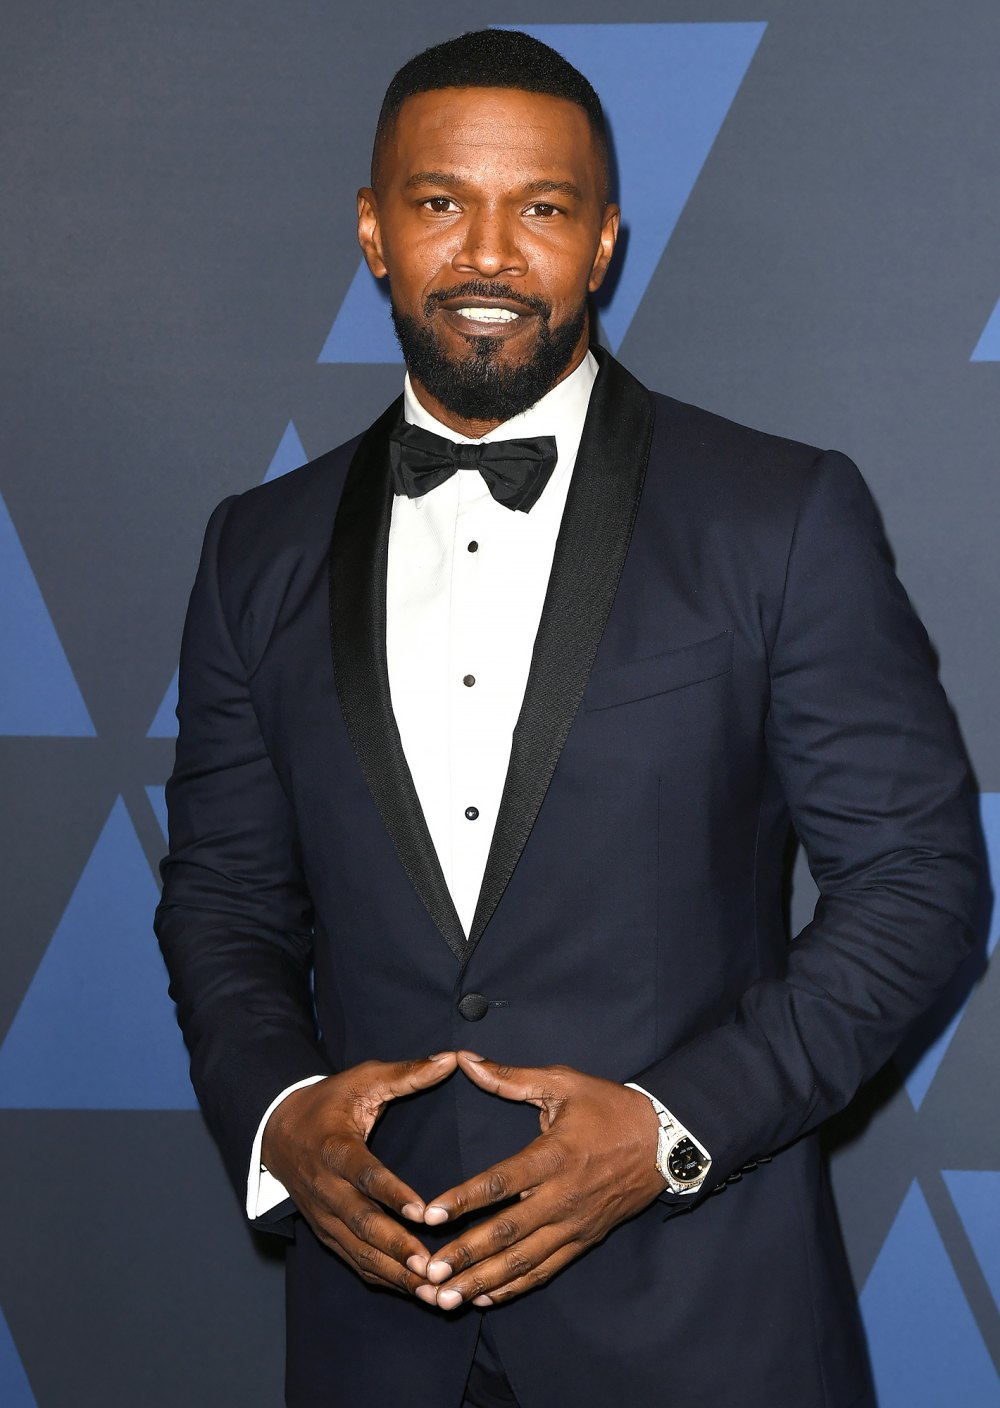 Jamie Foxx Reveals He 'Couldn't Actually Walk' 6 Months Ago in 1st Public Appearance Since Health Scare